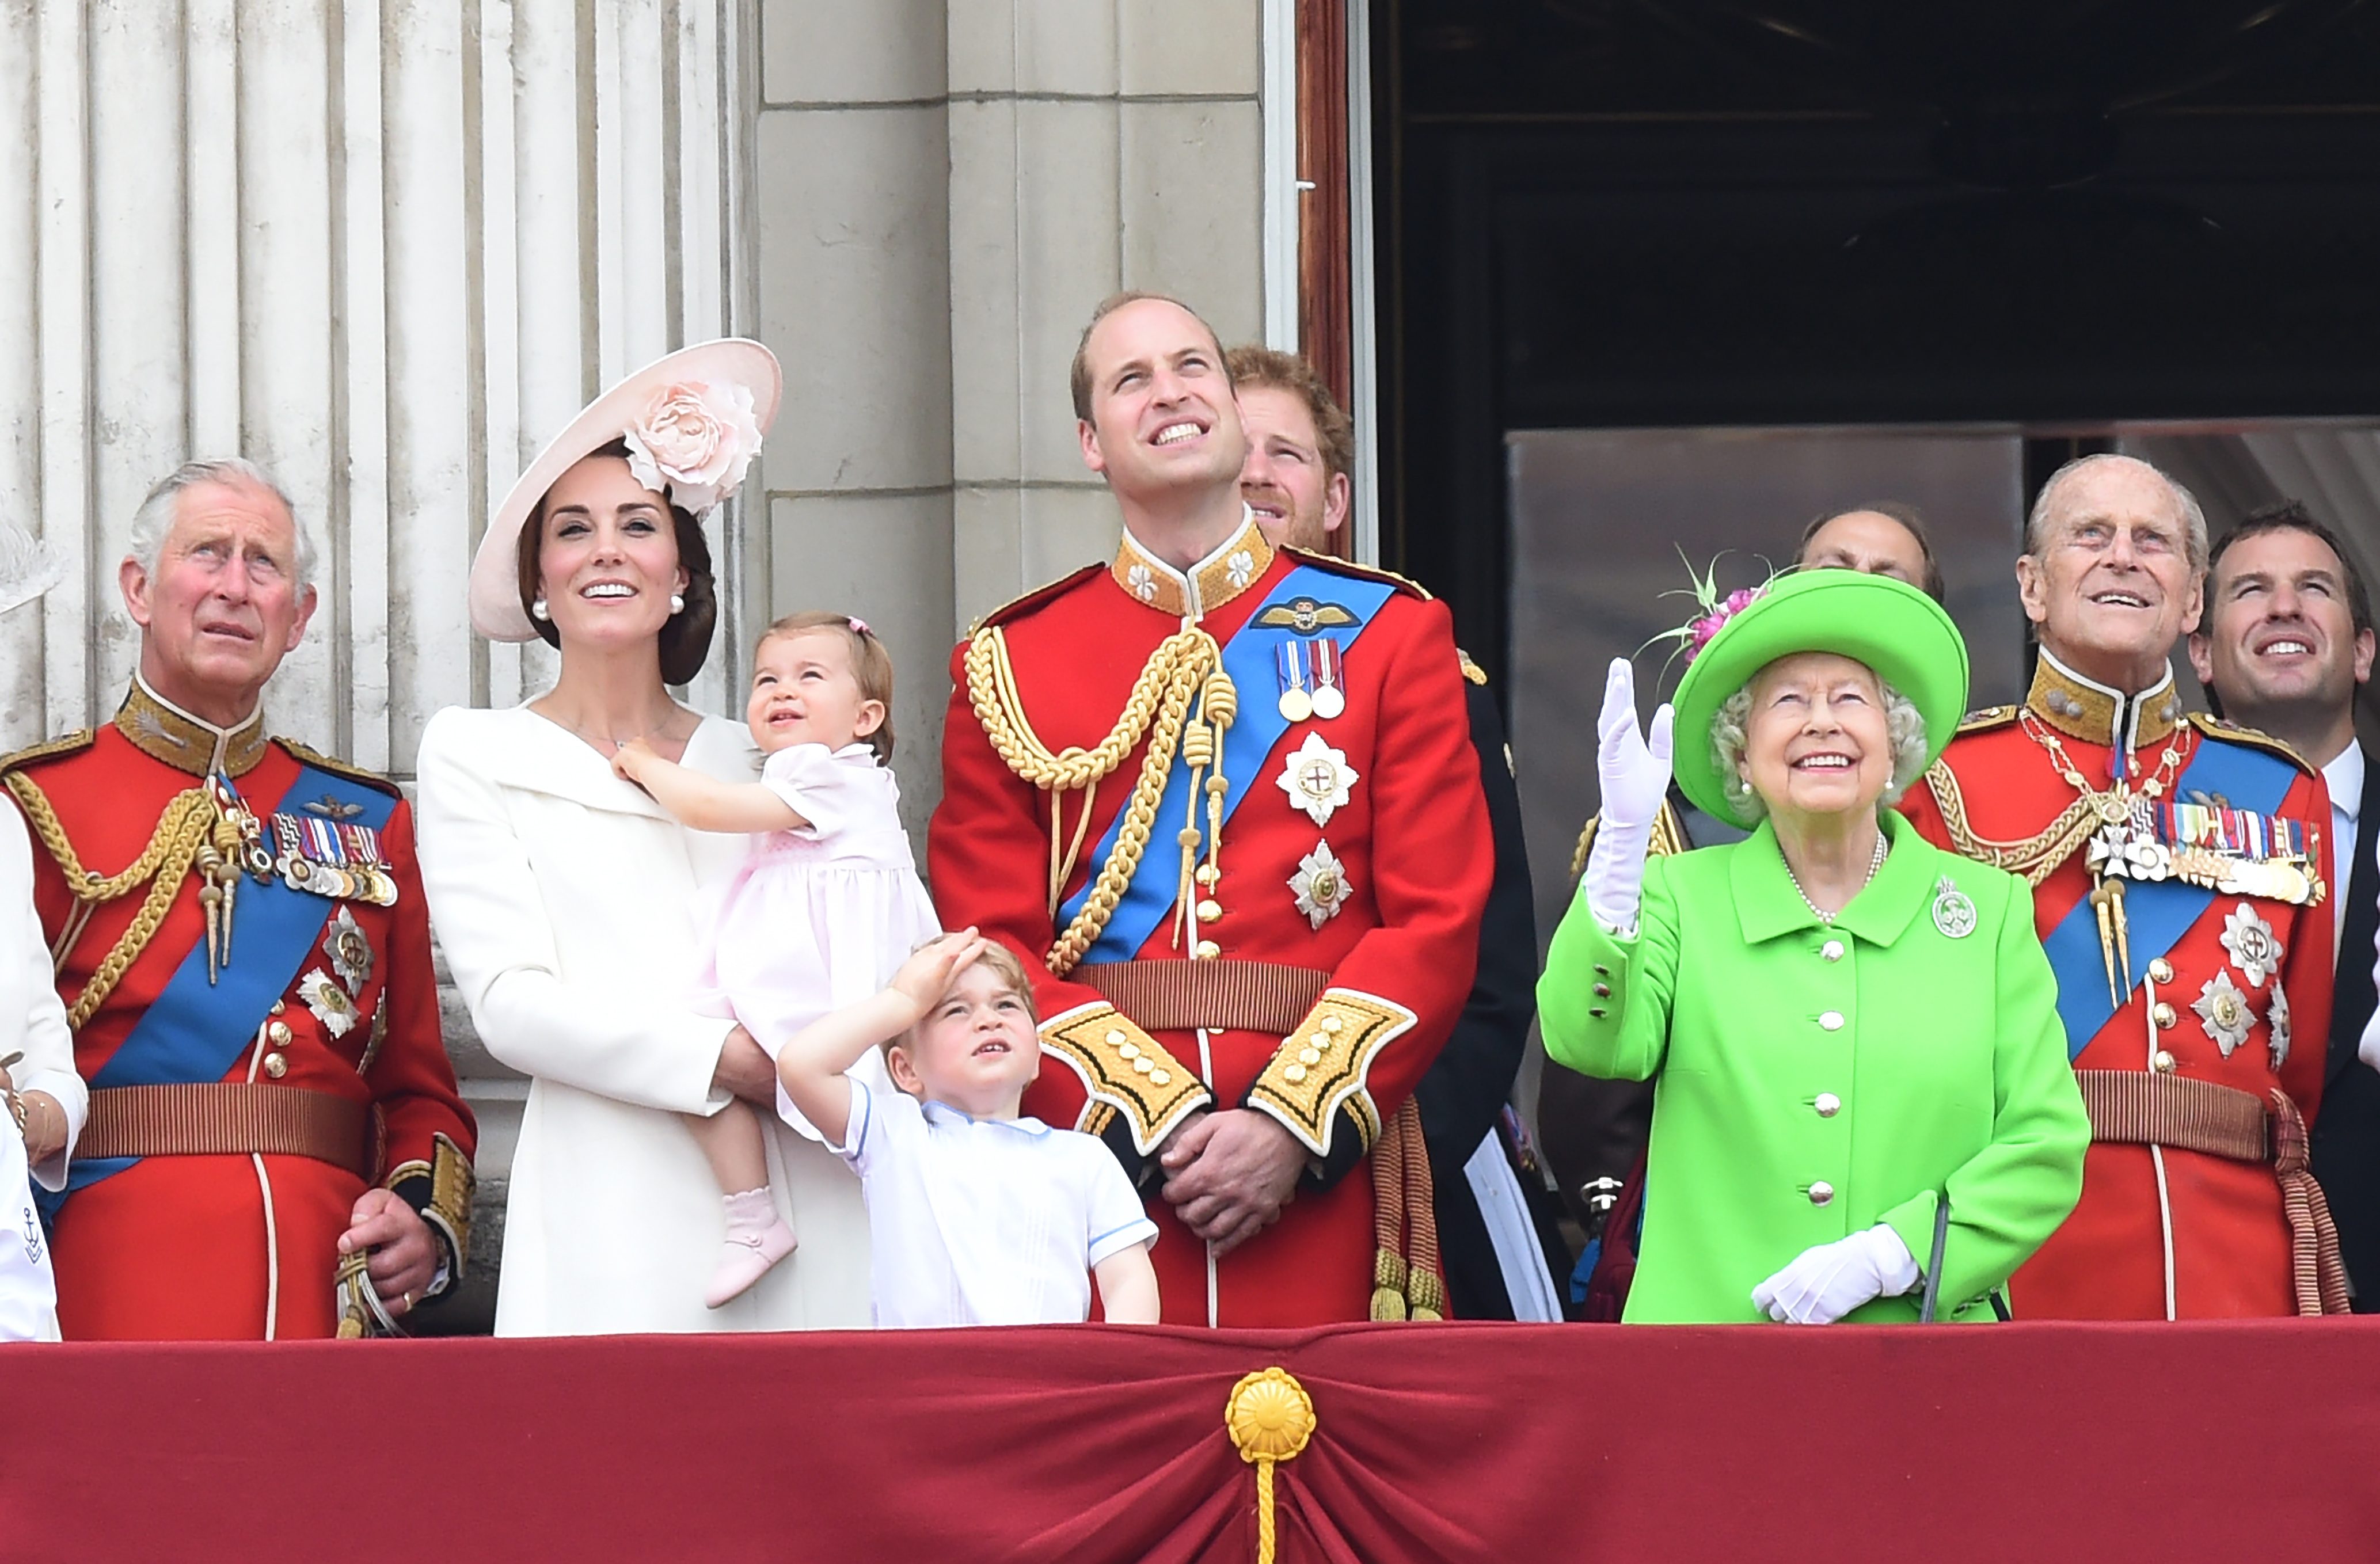 LOOK UP. (L-R) Britain's Charles, Prince of Wales, Catherine, The Duchess of Cambridge holding Princess Charlotte, Prince George, Prince William, Duke of Cambridge, Queen Elizabeth II, and Prince Philip, Duke of Edinburgh look up to the sky while standing in the balcony of Buckingham Palace during the Trooping of the Color parade in London, Britain, June 11, 2016. Photo by Facundo Arrizabalaga/EPA 